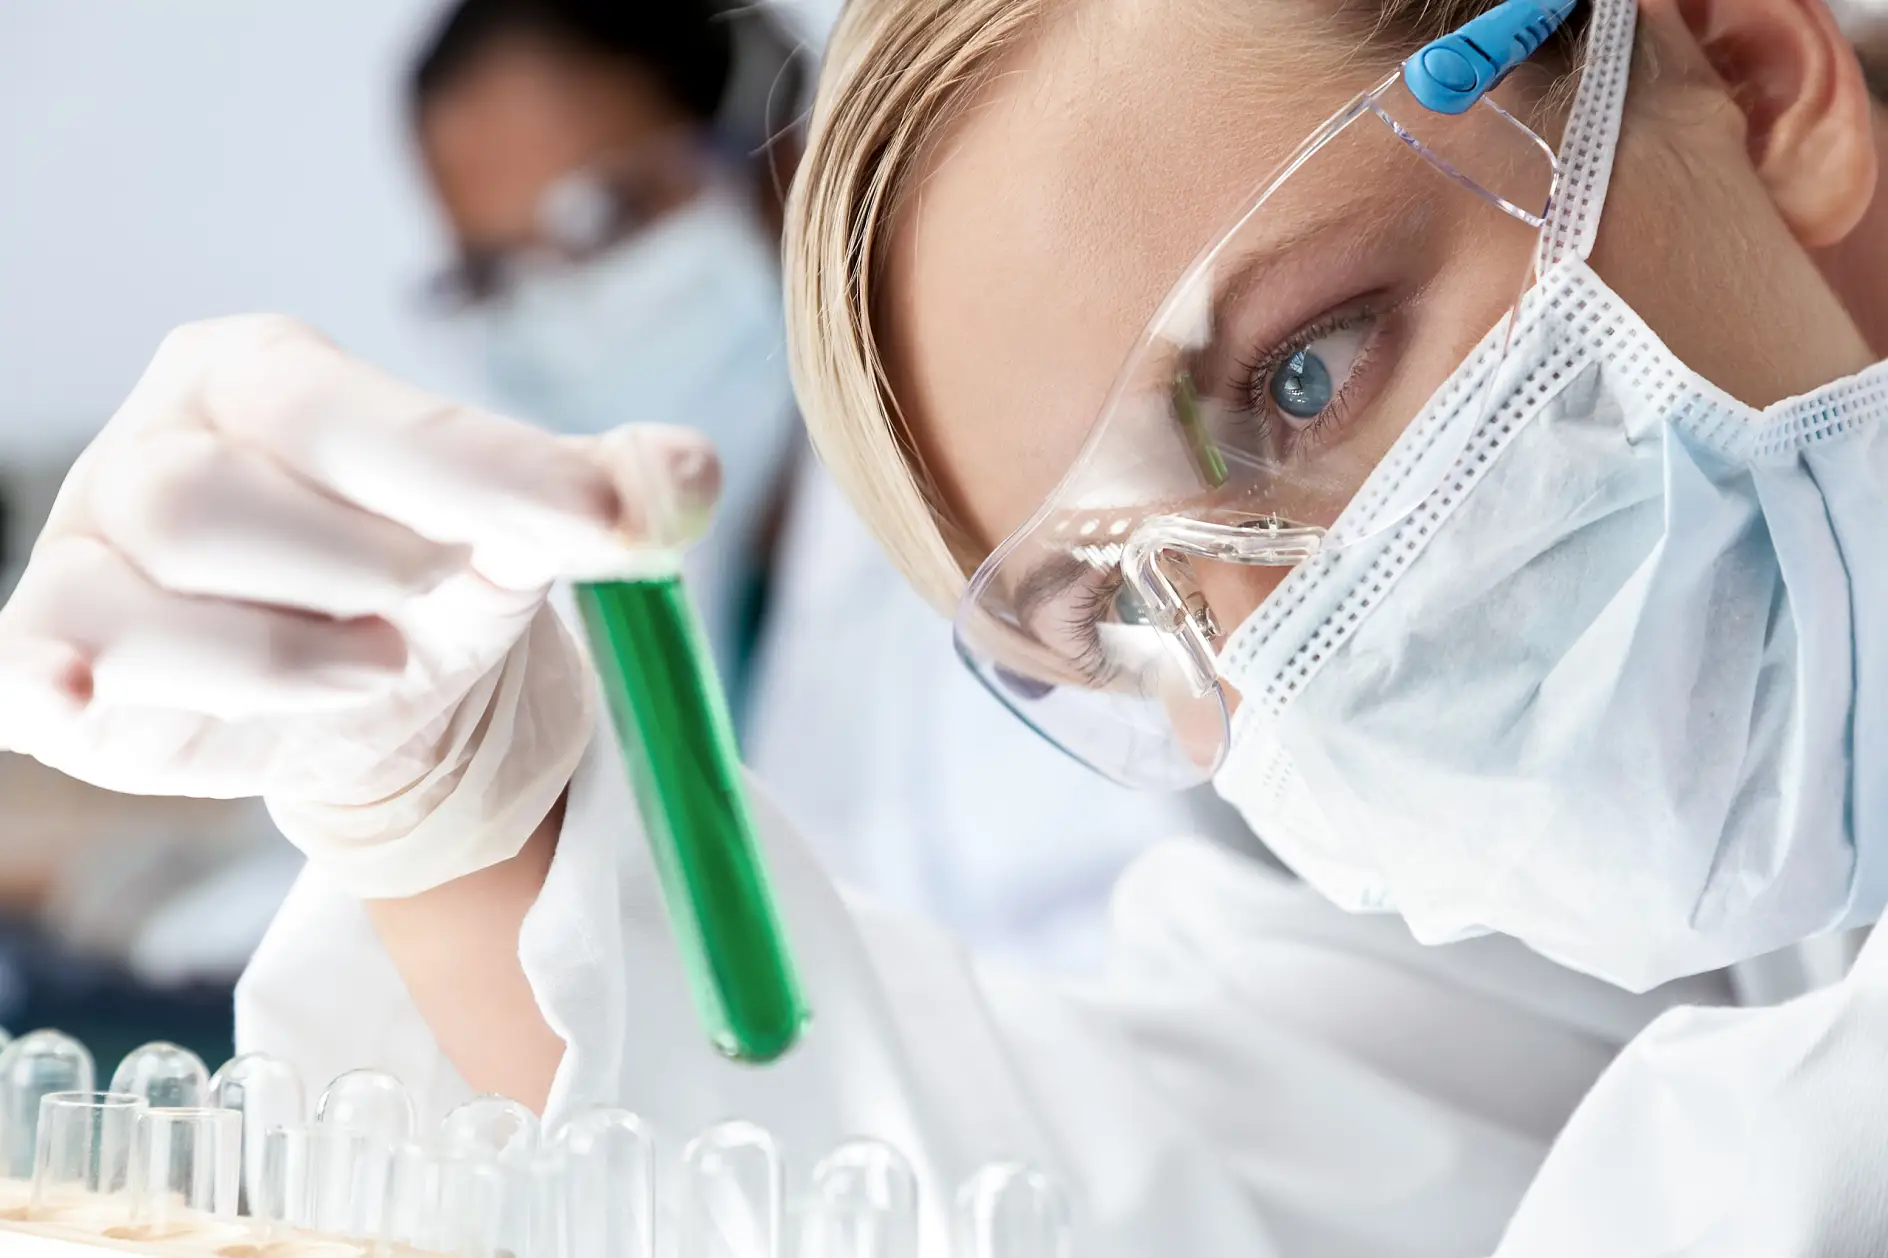 A female medical or scientific researcher or doctor looking at a green solution in a laboratory with her Asian female colleague out of focus behind her.